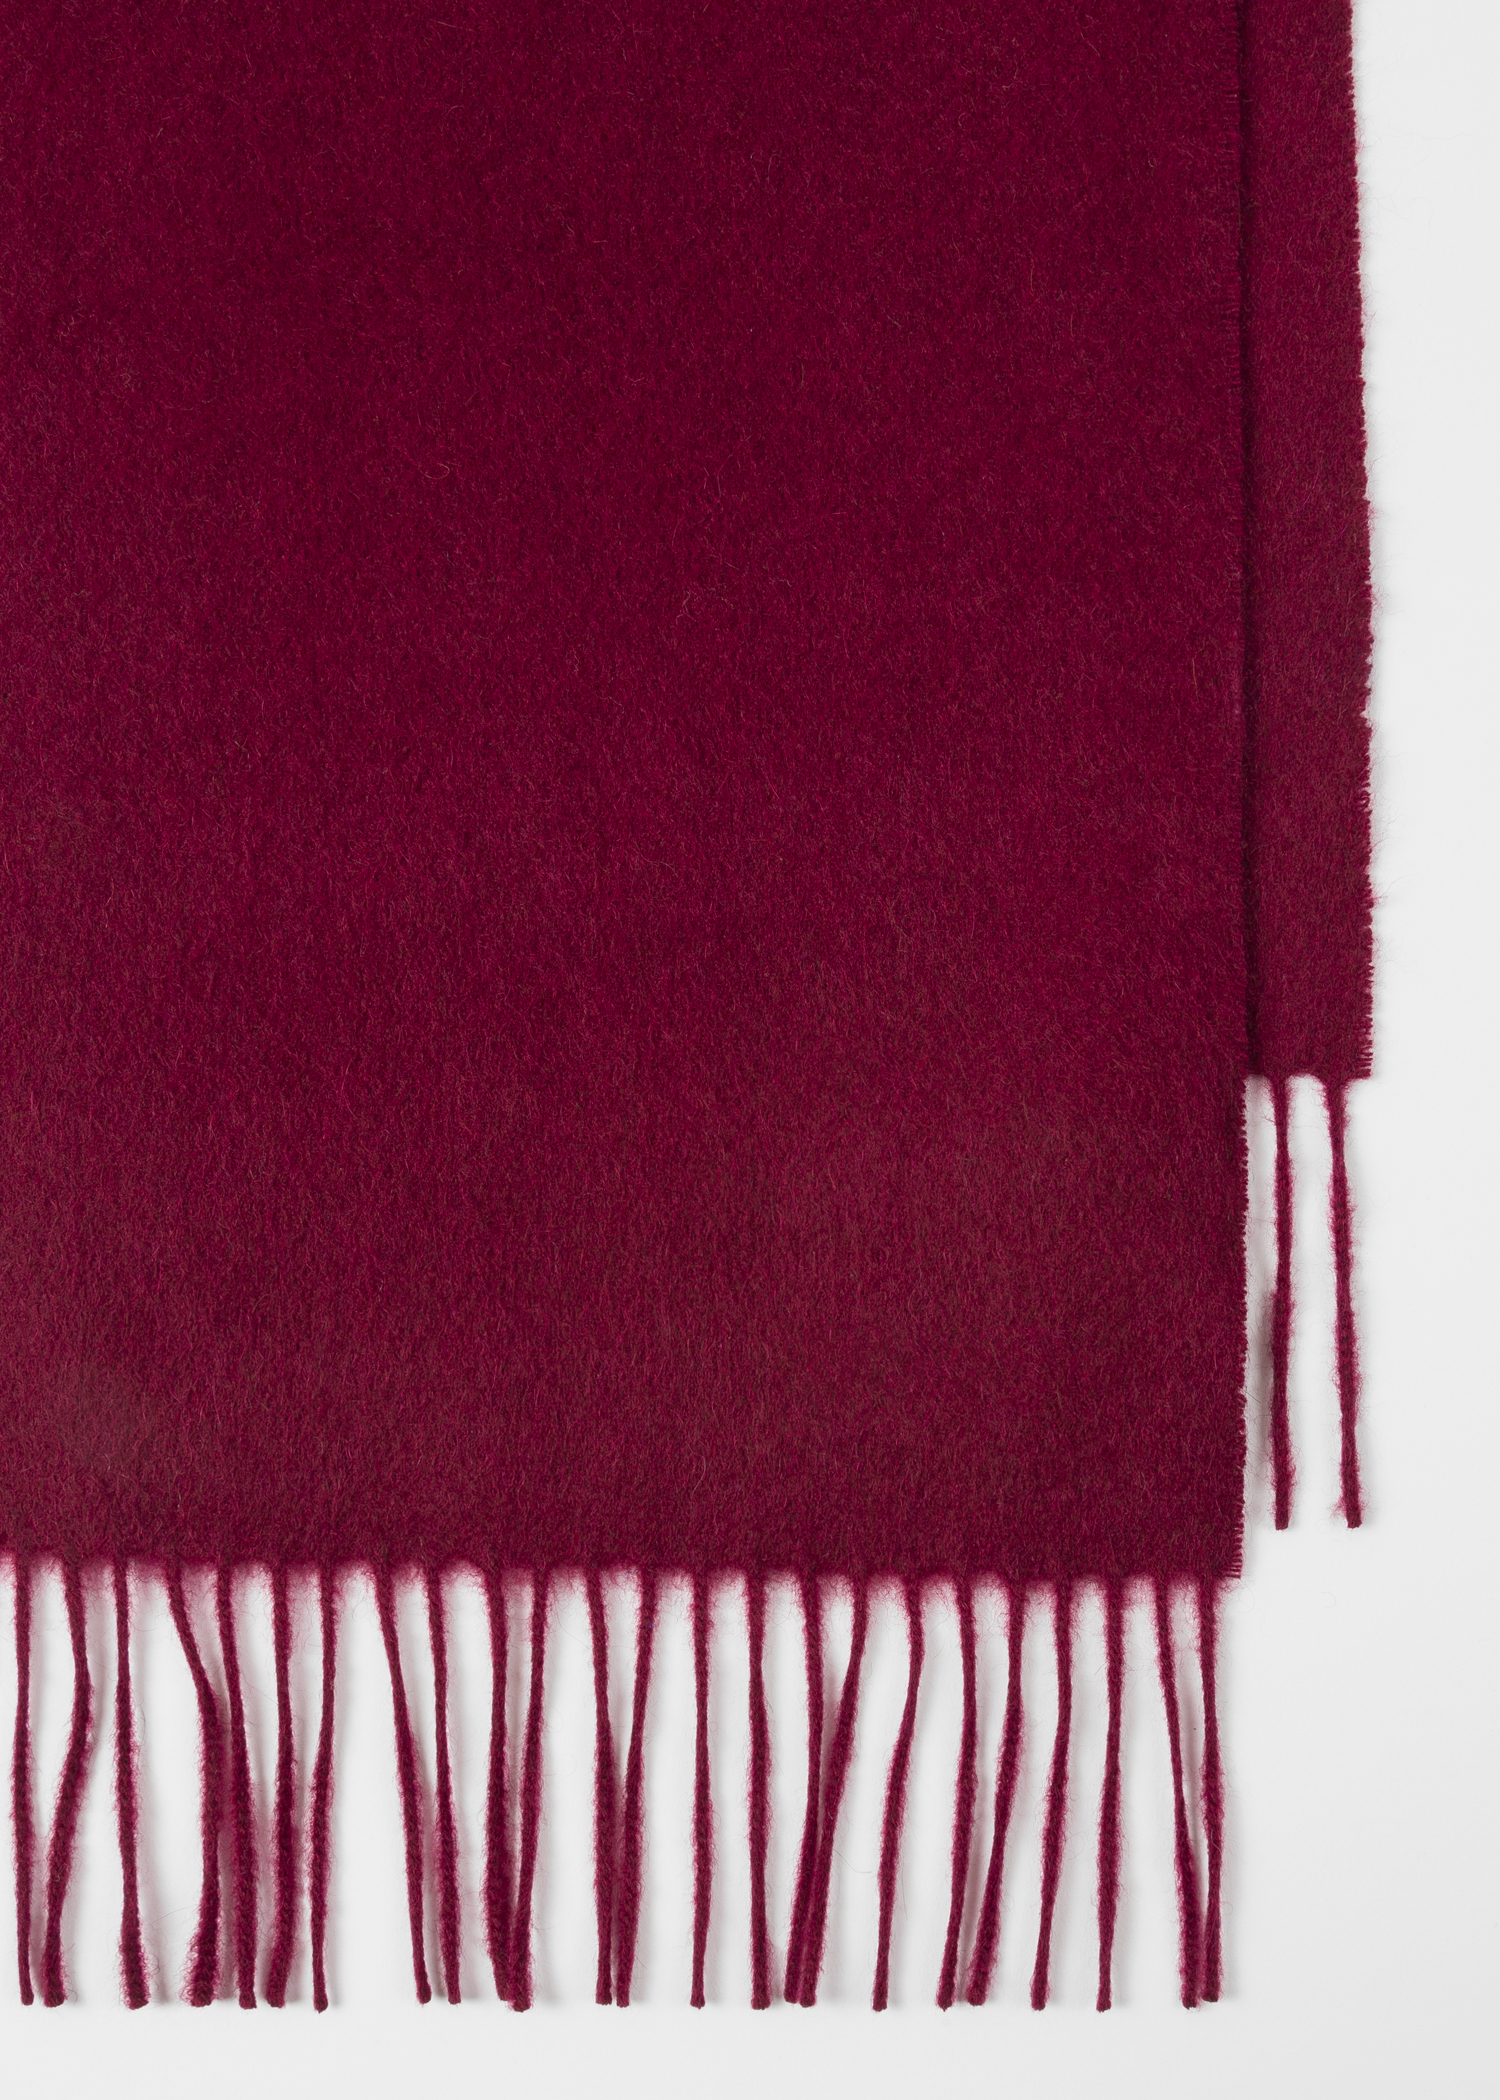 Detail view without logo - Burgundy Cashmere Scarf Paul Smith